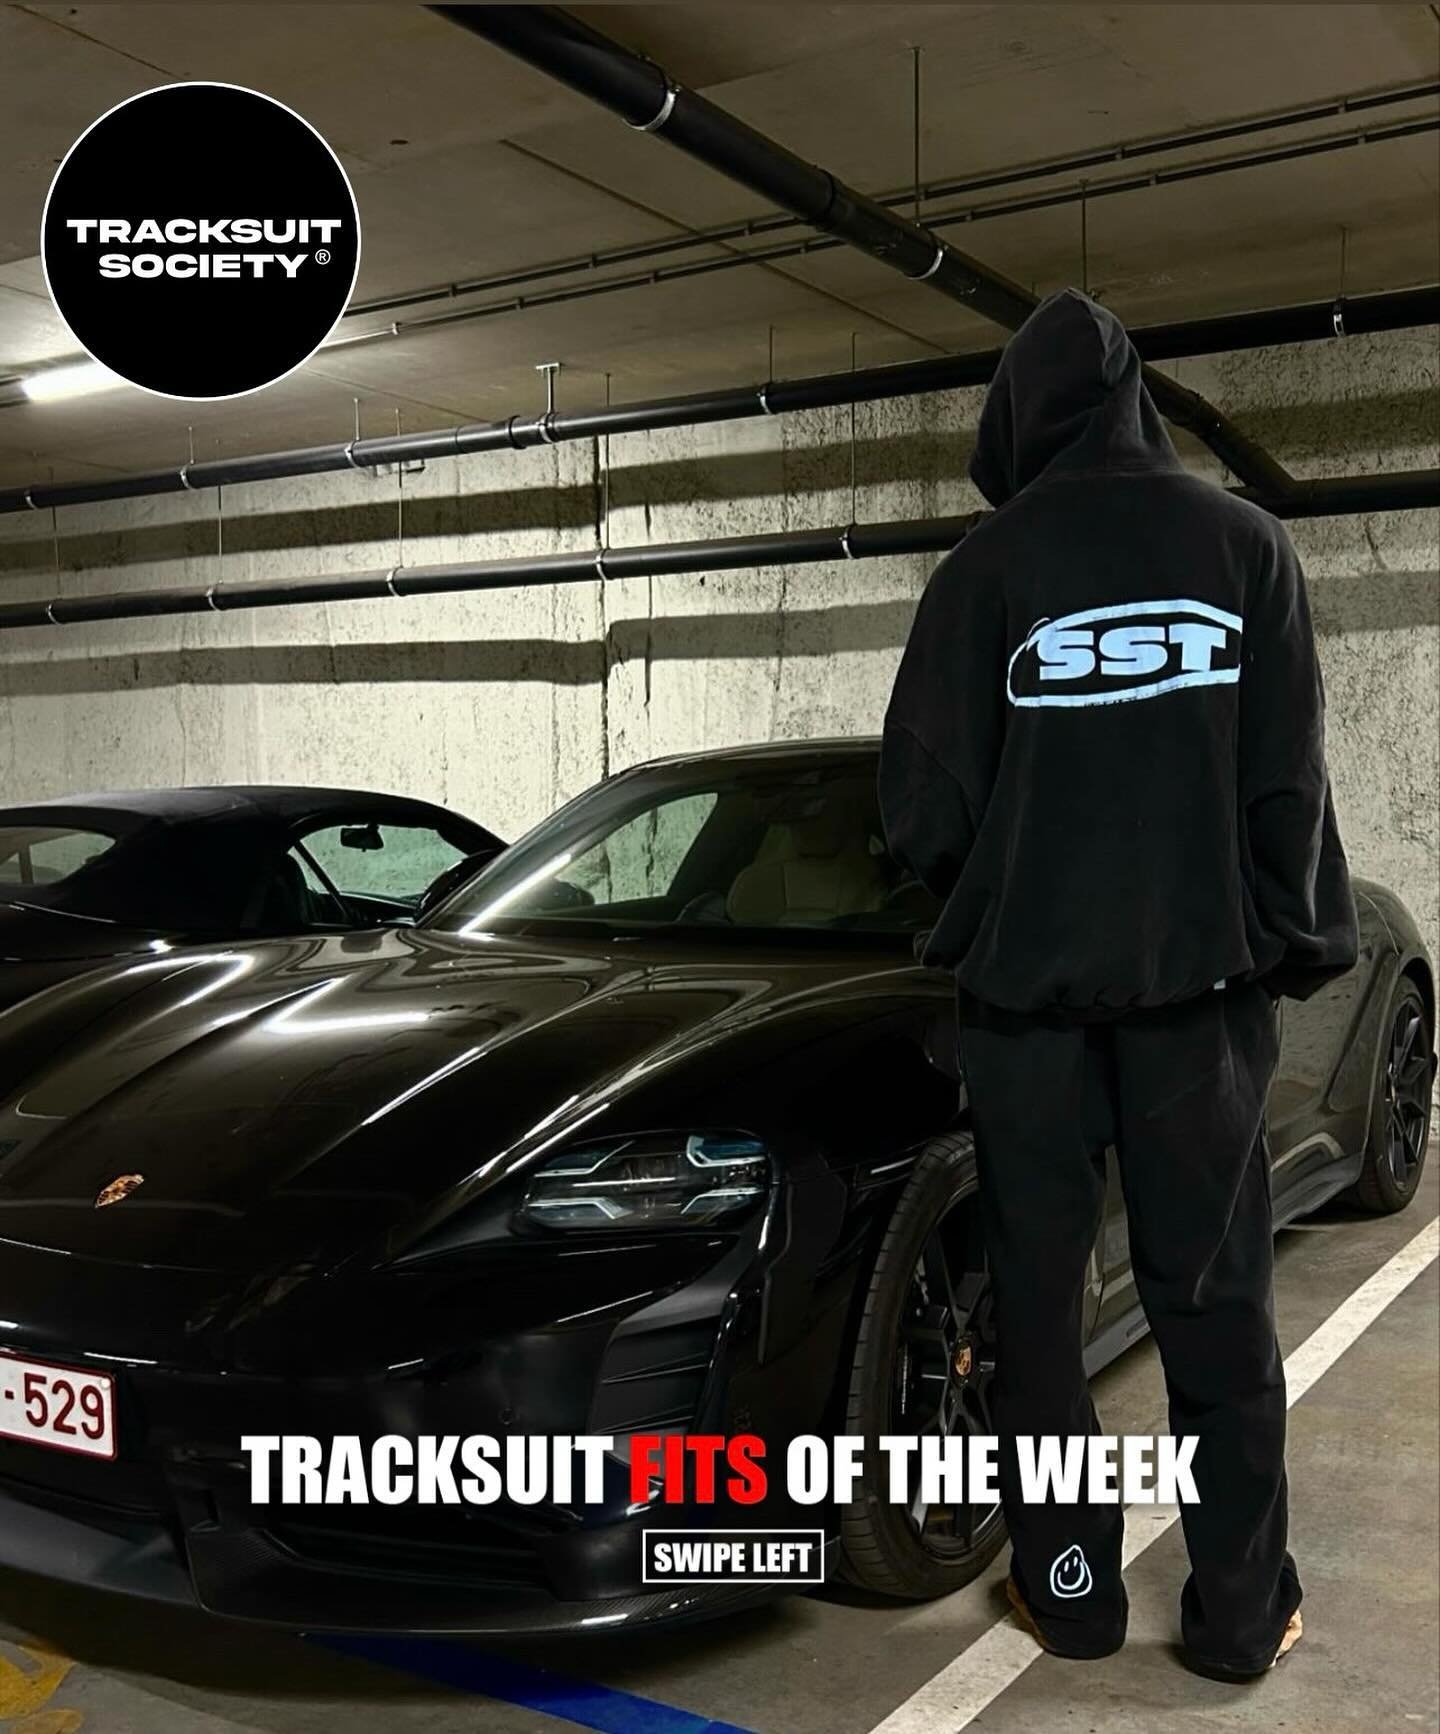 Featuring the best tracksuit fits of the week 📸✔️

SWIPE LEFT ⬅️ To feature next week tag @tracksuit_society #tracksuitsociety
.
.
.
.
.
#tracksuitmafia #trackies #outfitinspo #fitoftheday #joggerstyle #tracksuitsociety #sweatsuit